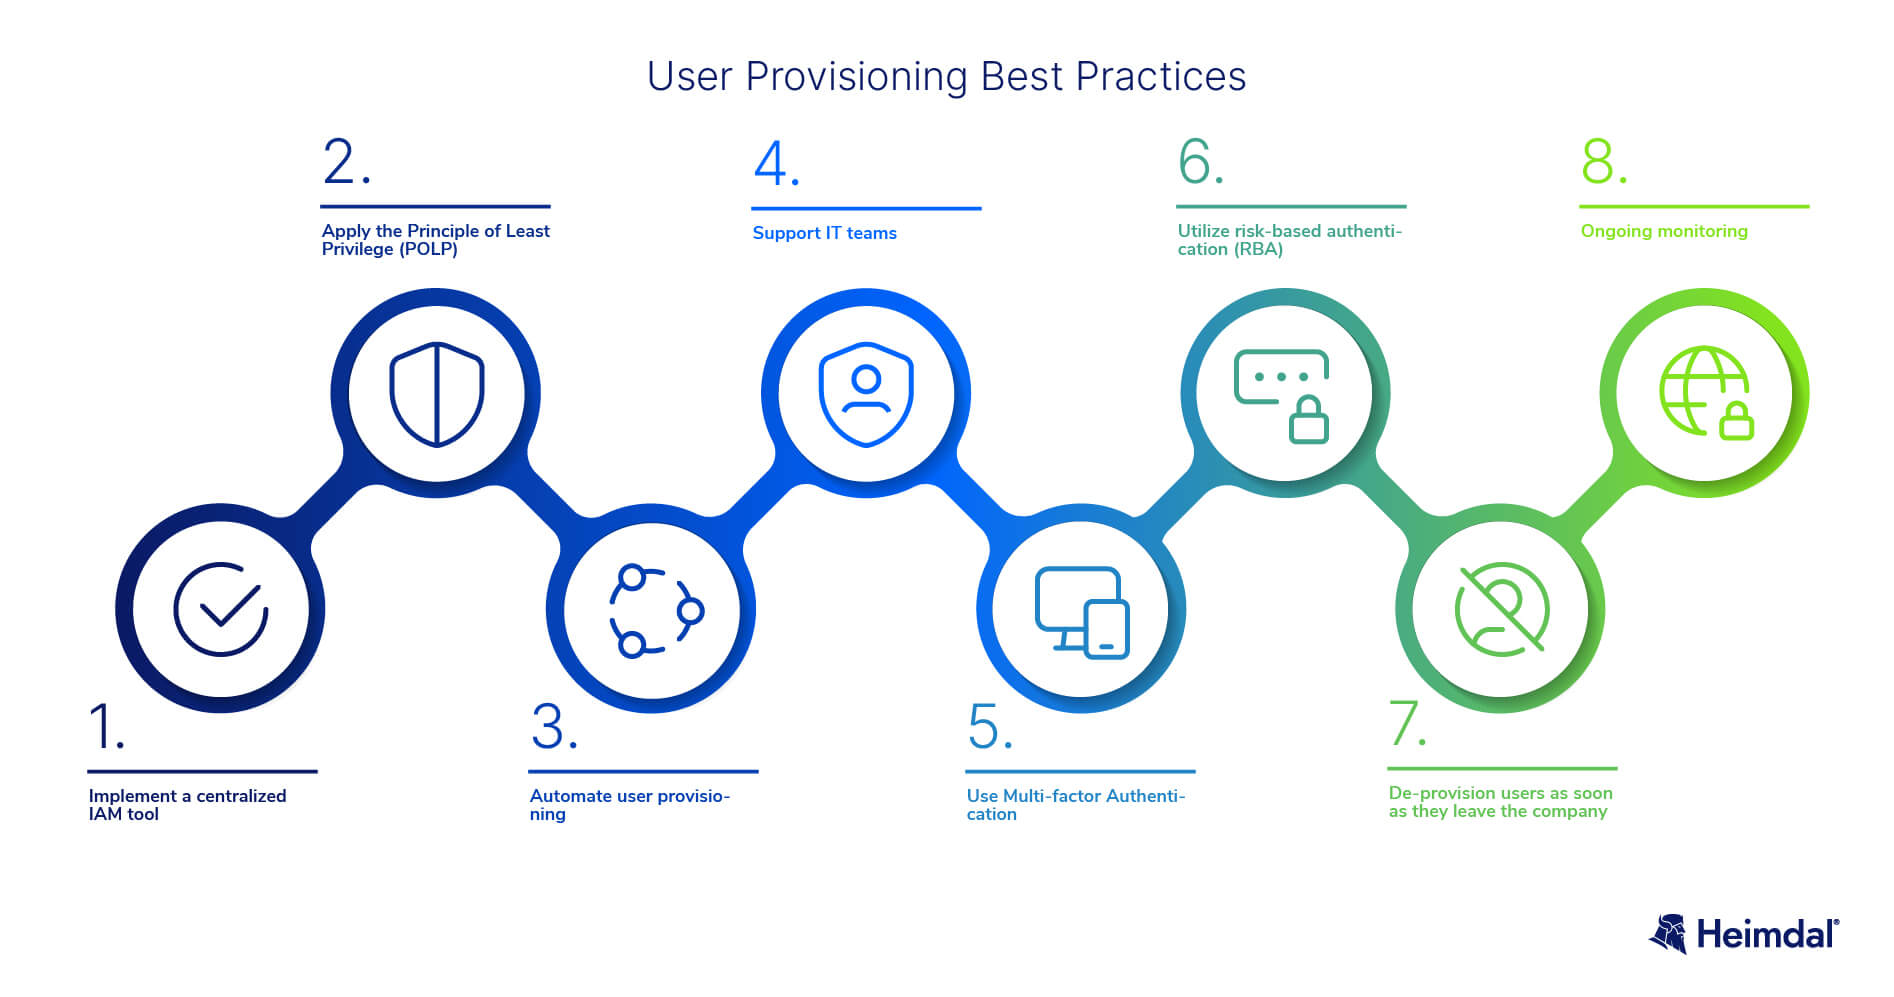 user provisioning best practices image for article on Heimdal's blog